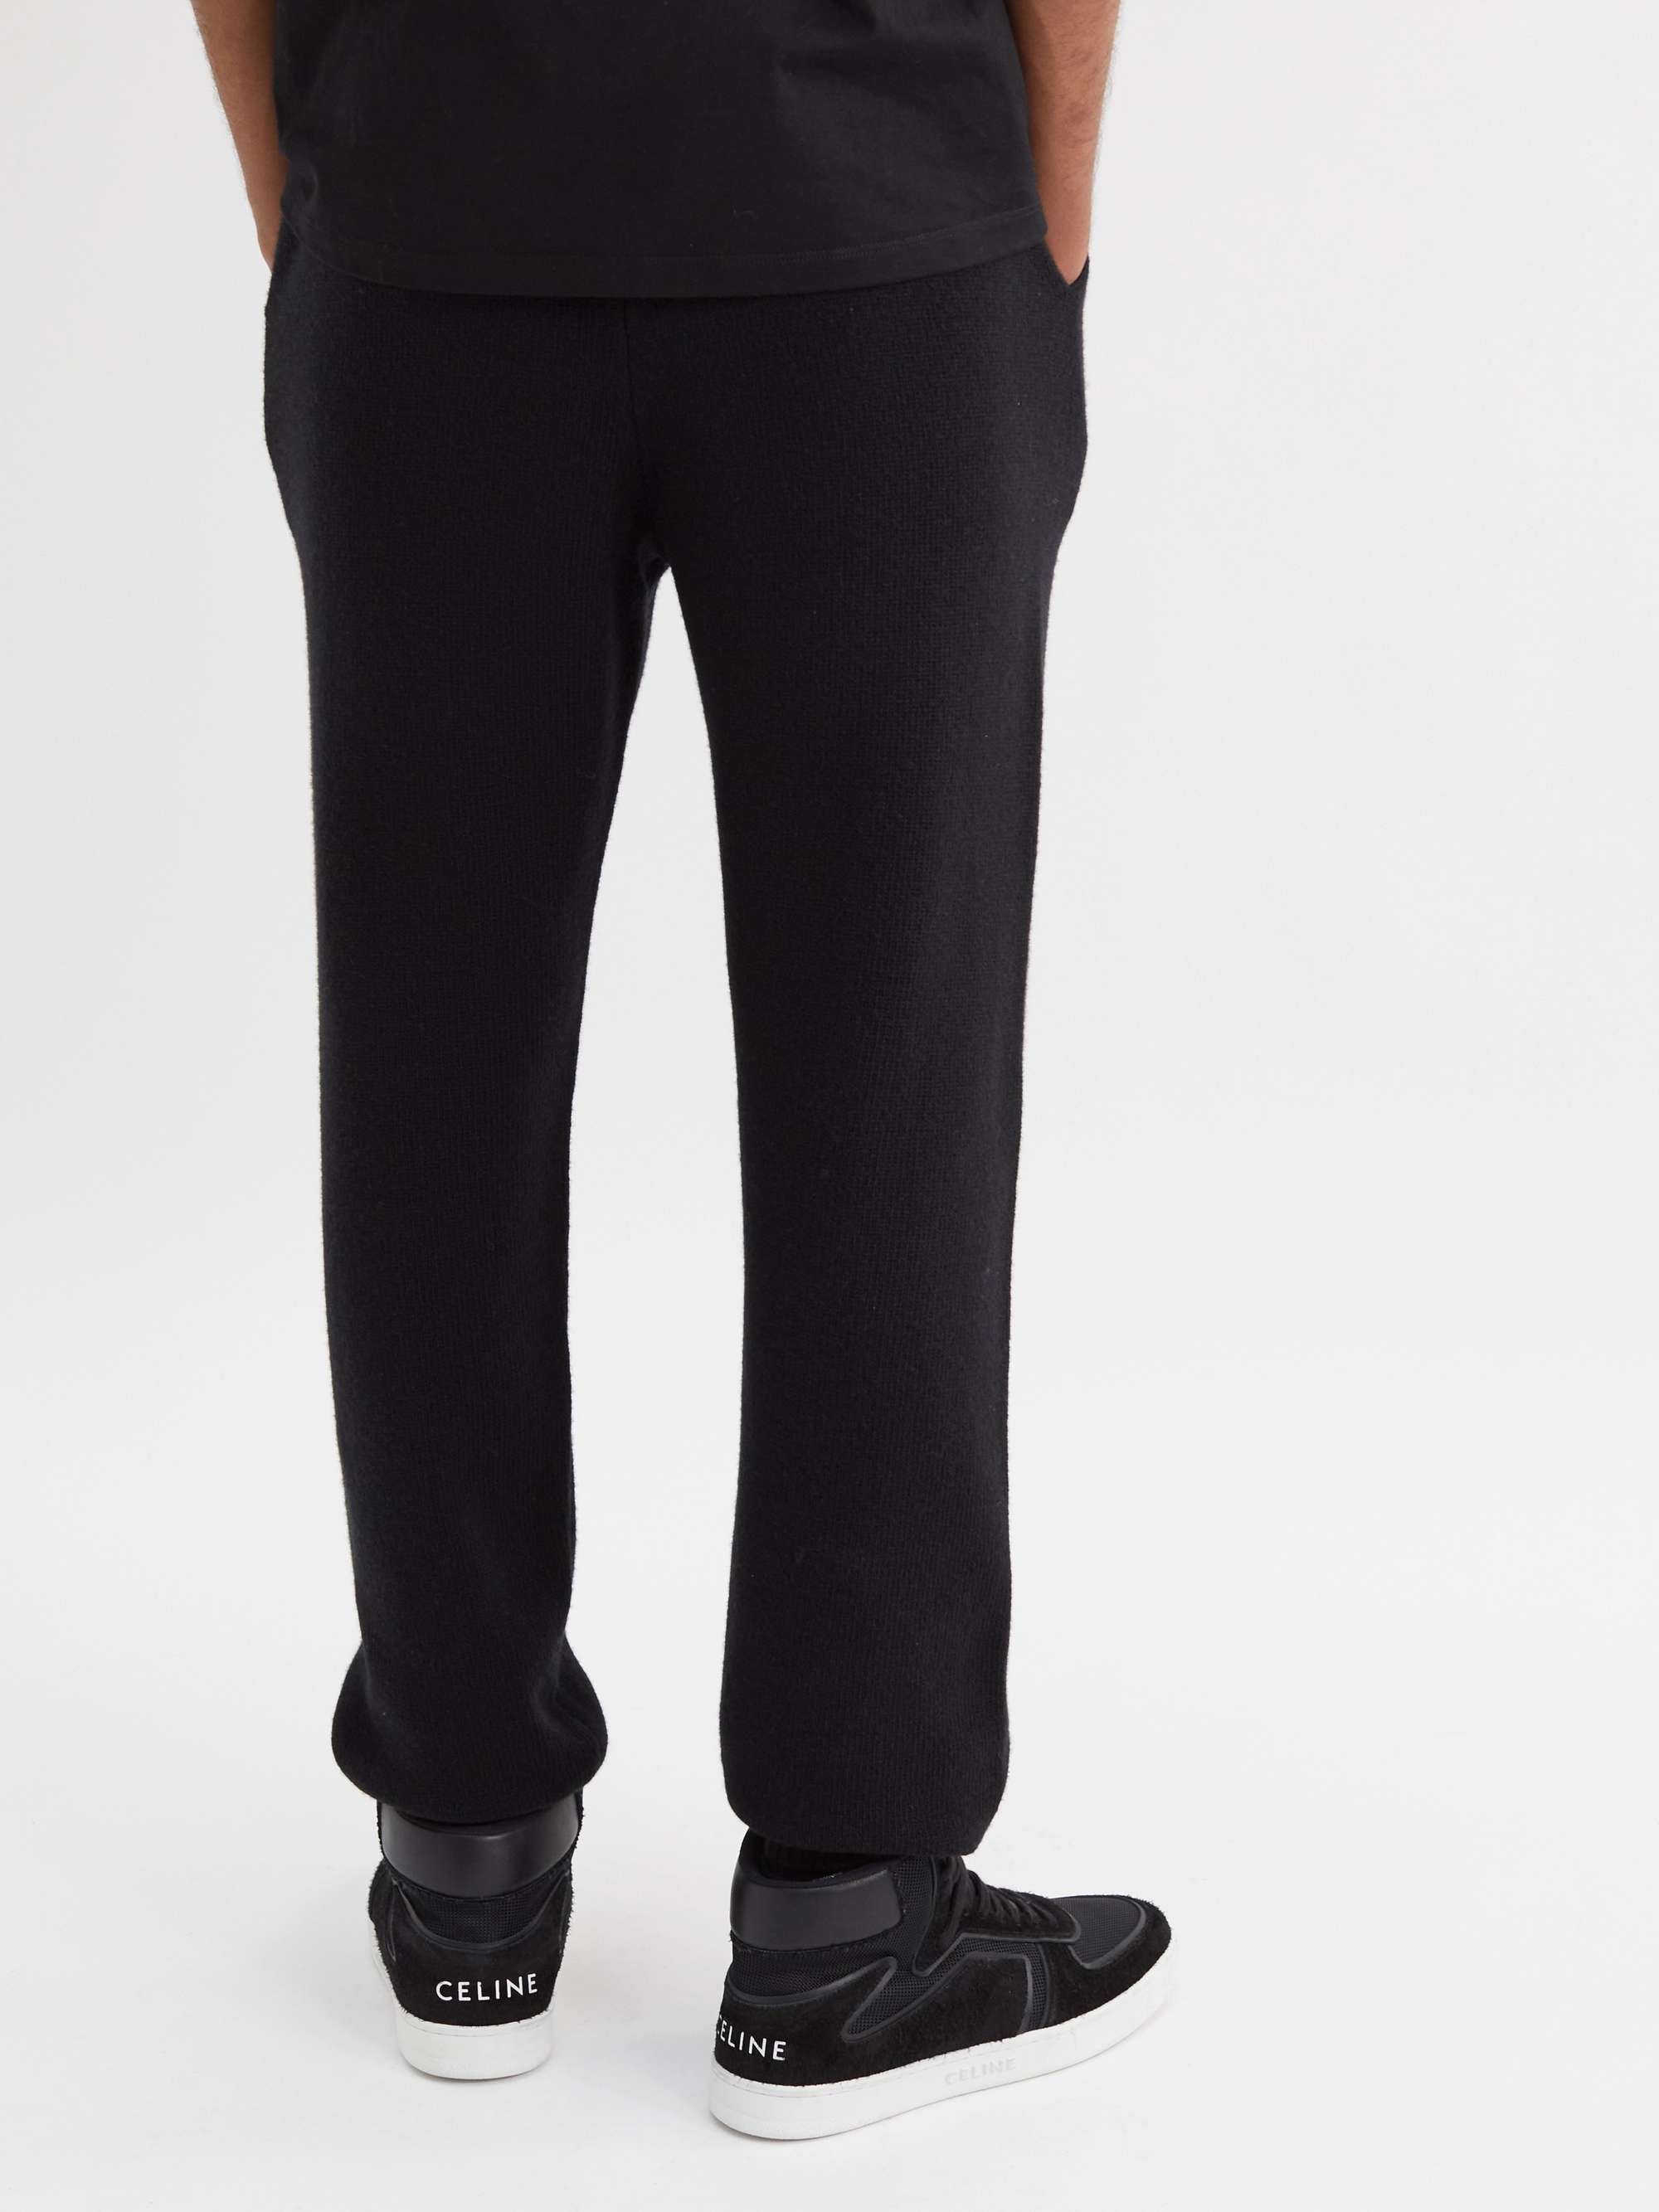 CELINE HOMME Tapered Wool and Cashmere-Blend Sweatpants